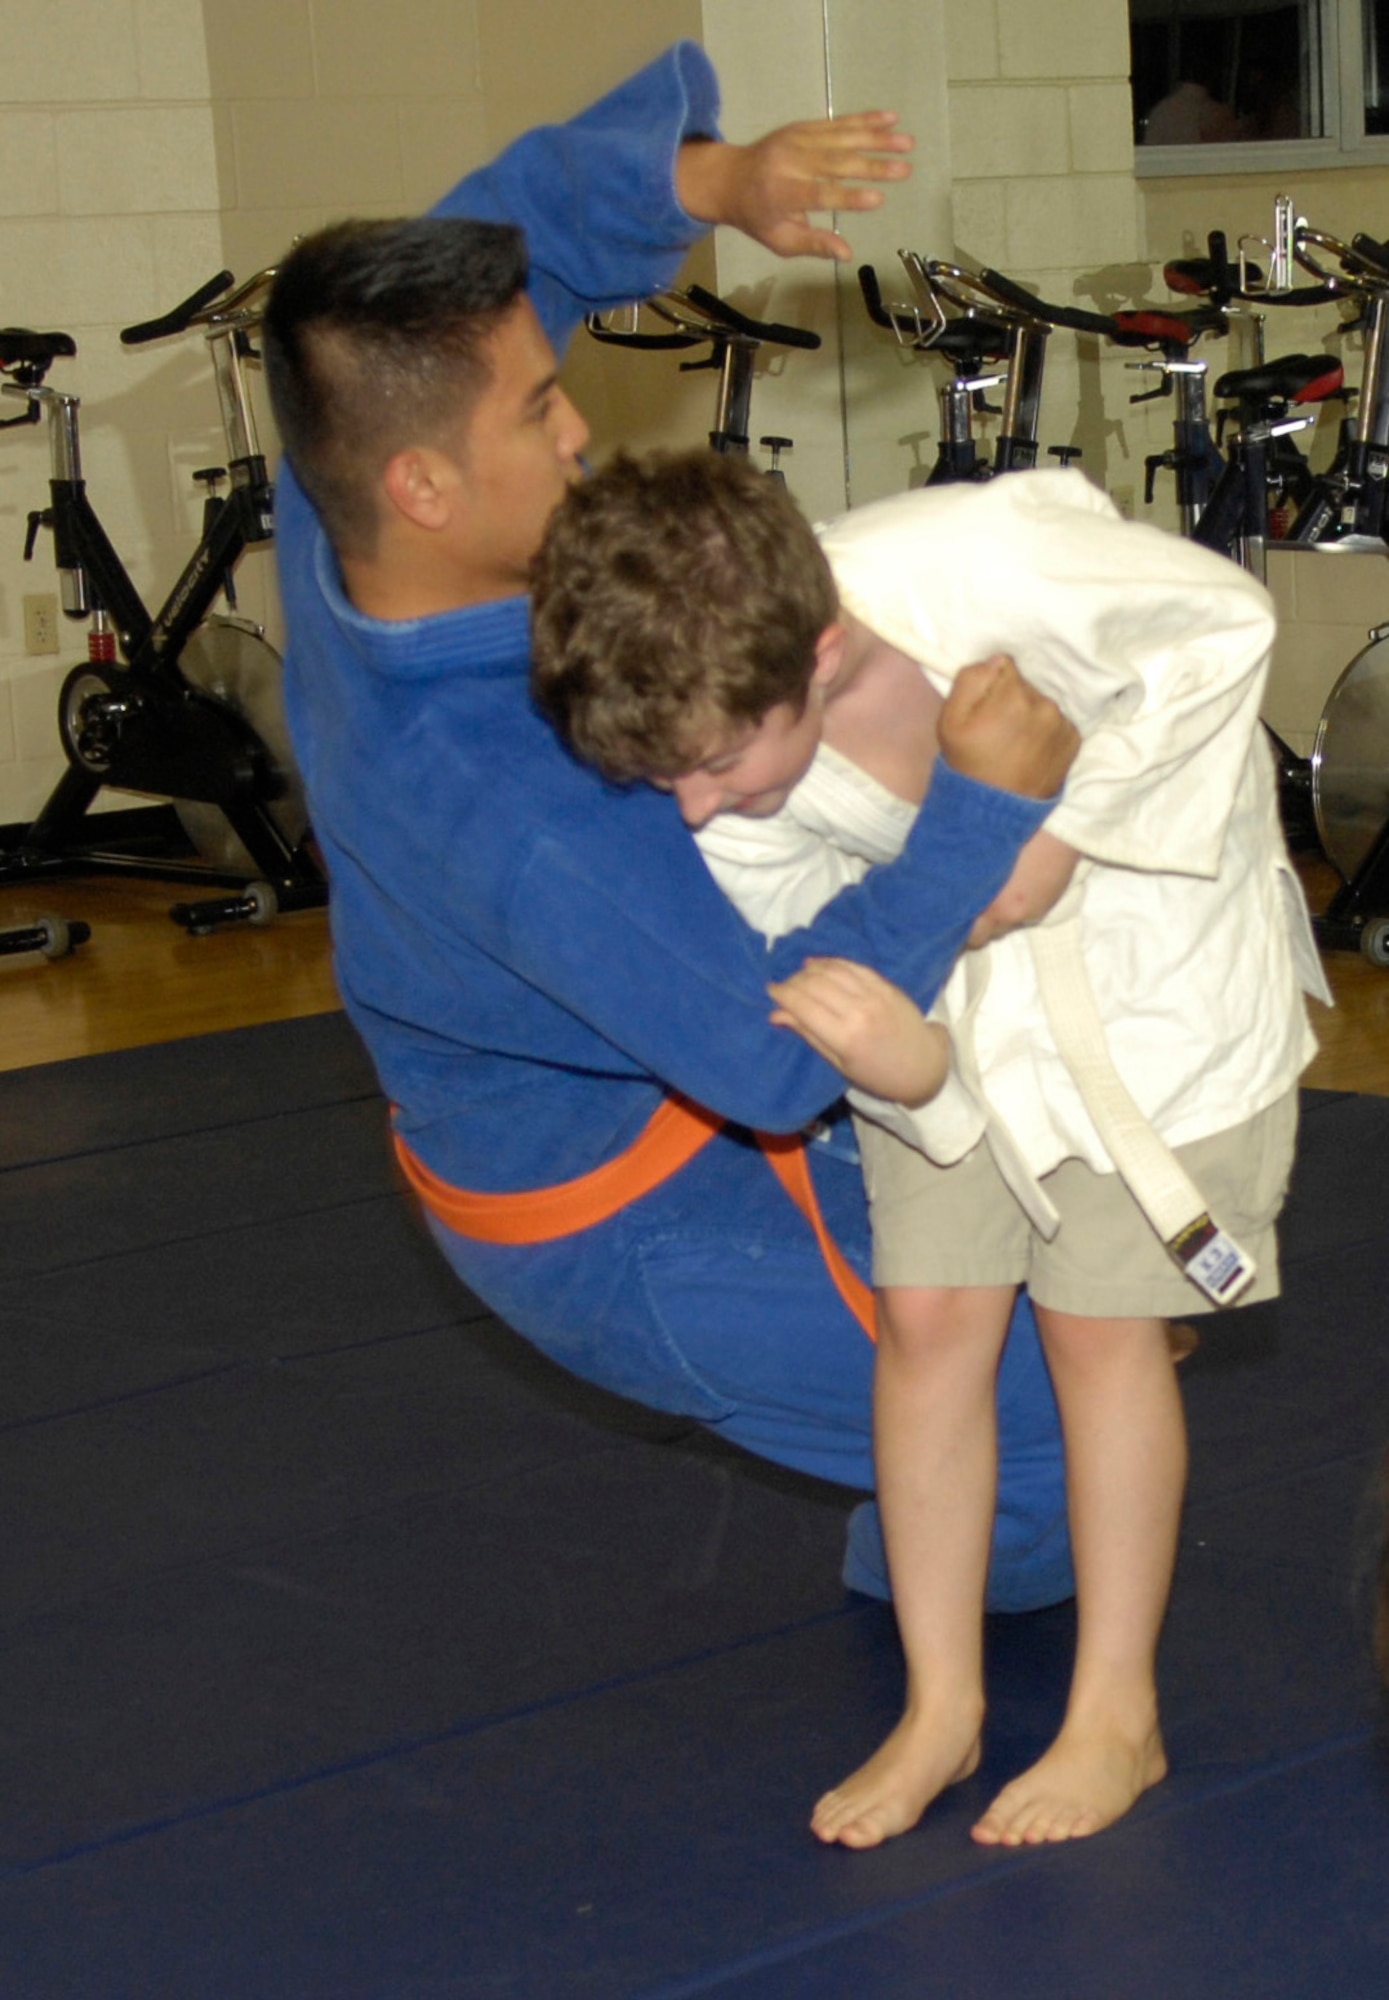 BARKSDALE AIR FORCE BASE, La. - Airmen 1st Class EJ Dino, 2d Aircraft Maintenance Squadron, gets thrown during a Judo move by Brandon Cox, age 10, from Princeton Elementary School.  Judo is a form of self- defense.  It takes place at the Fitness Center on Tuesdays for juniors starting at 6 p.m., and Thursdays for seniors starting at 7 p.m.  (Air Force photo by Senior Airman Alexandra Sandoval) (Released)